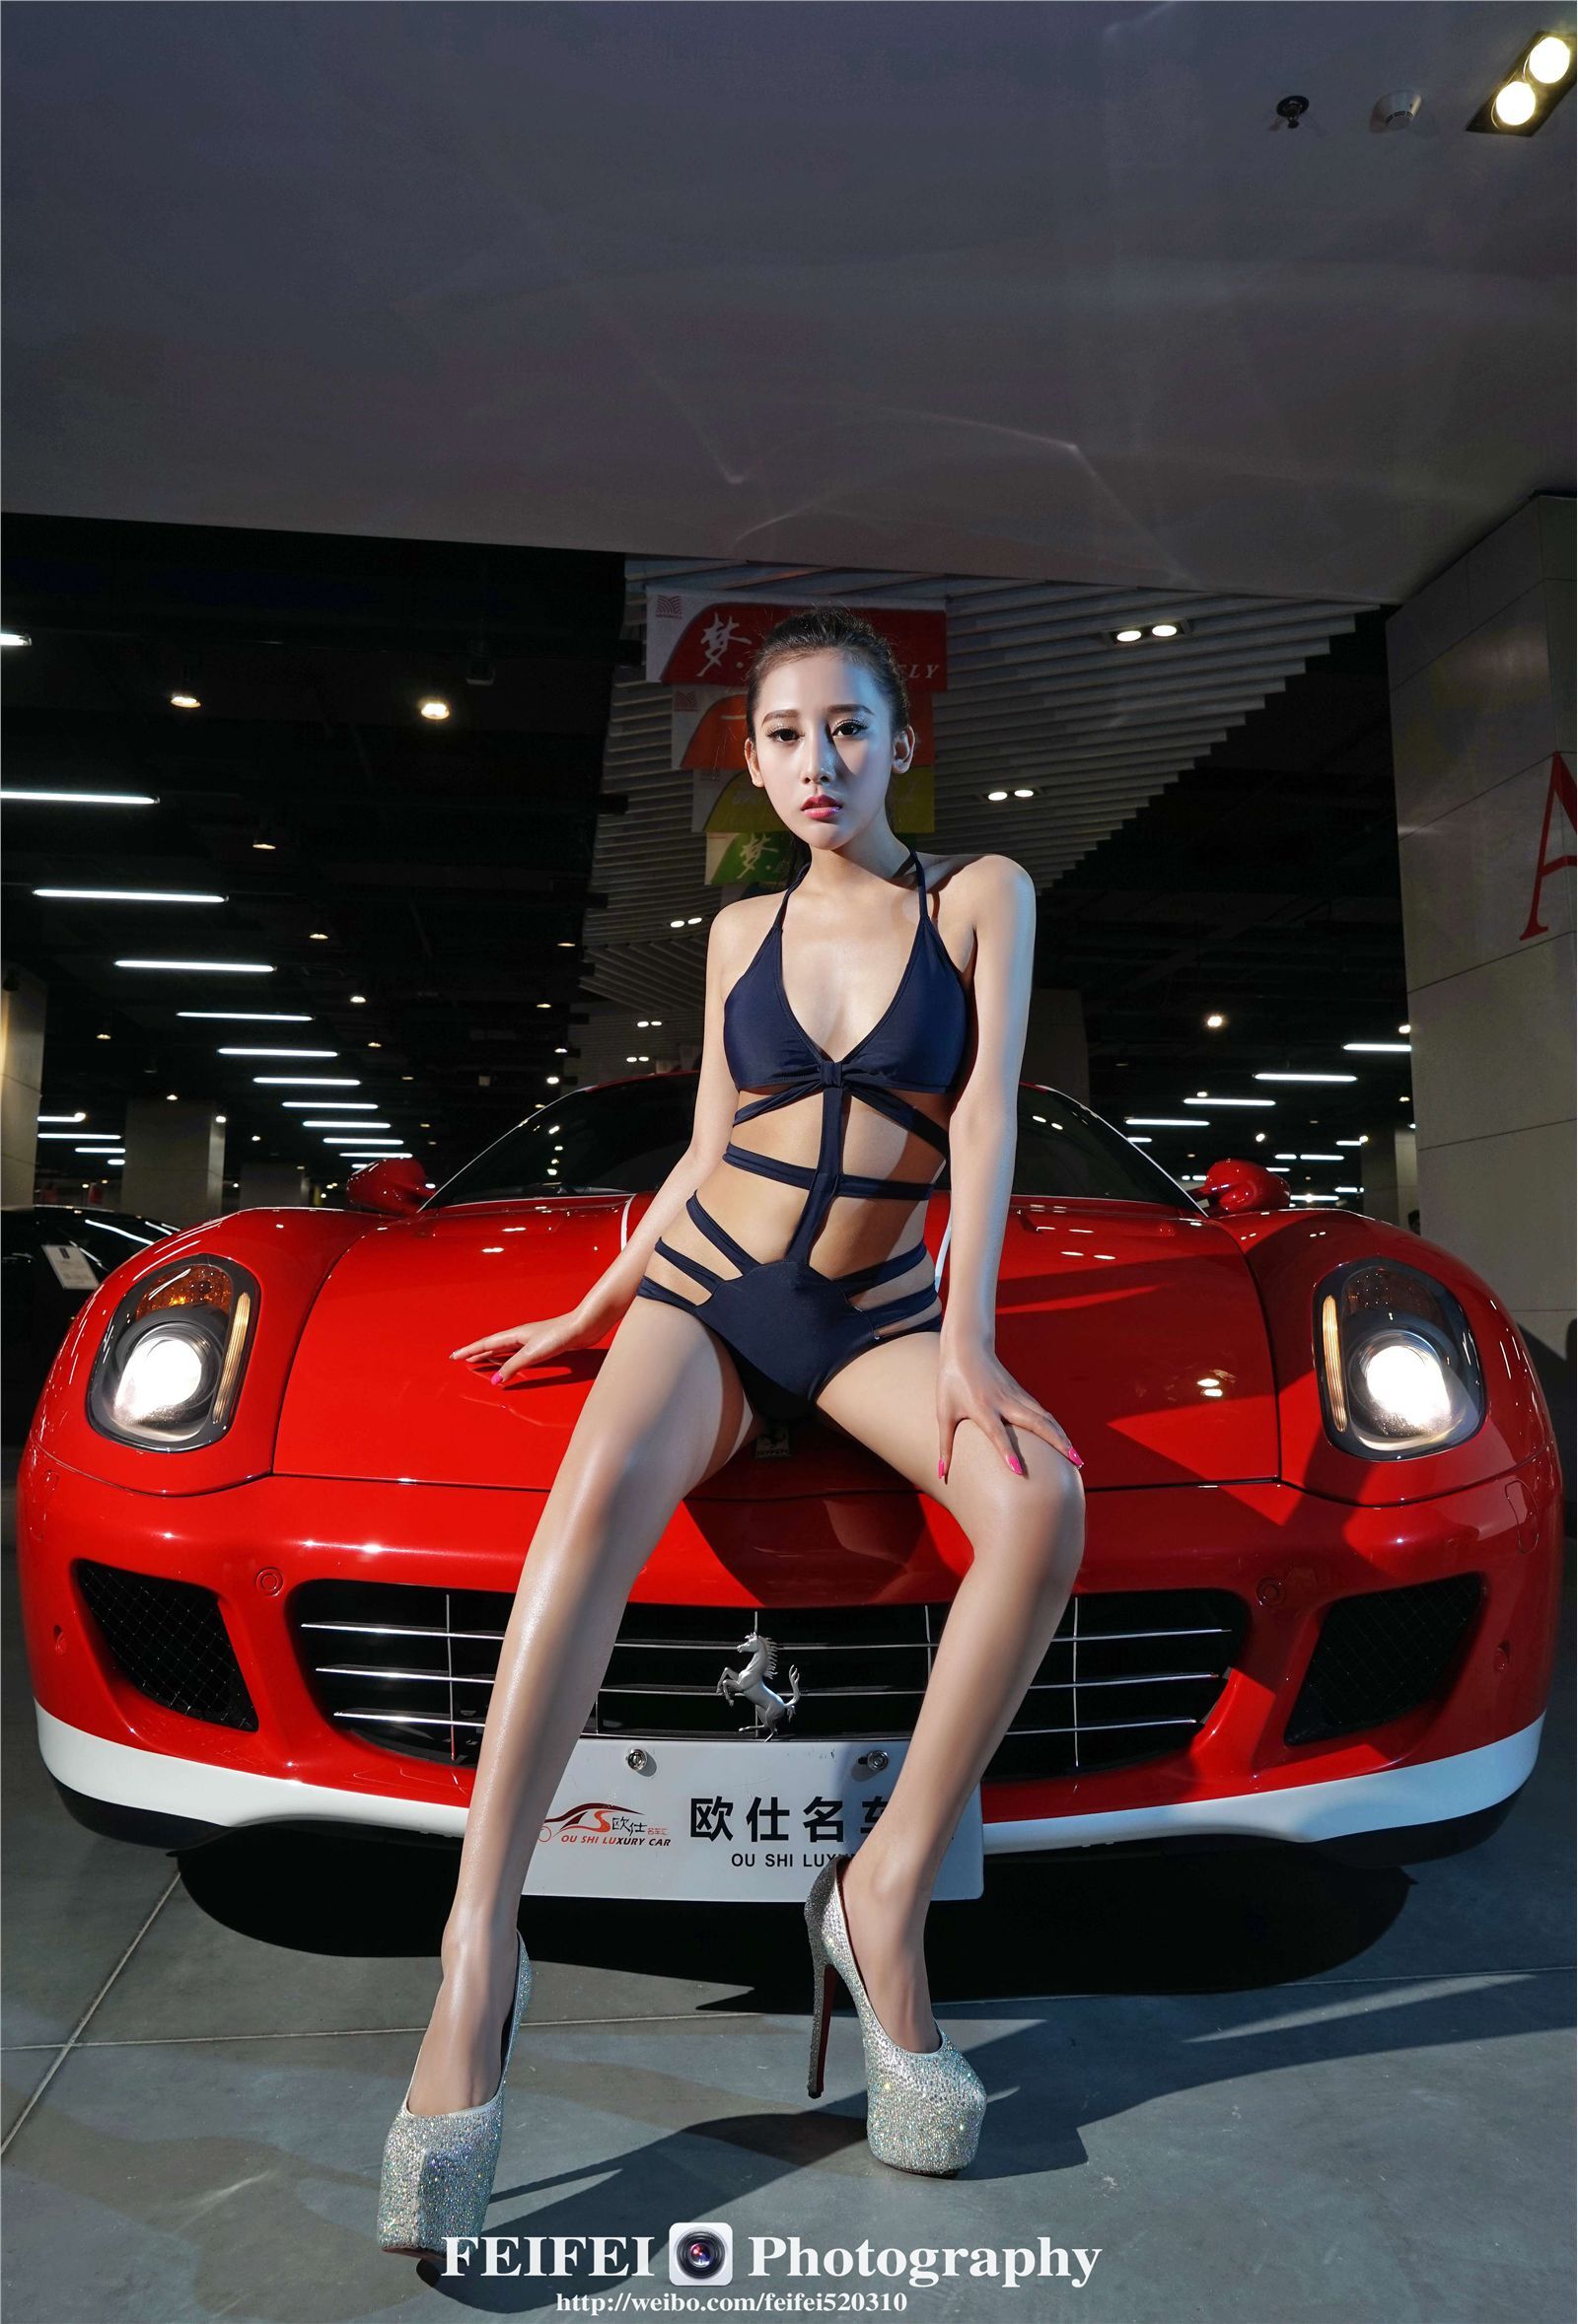 The goddess of sports car